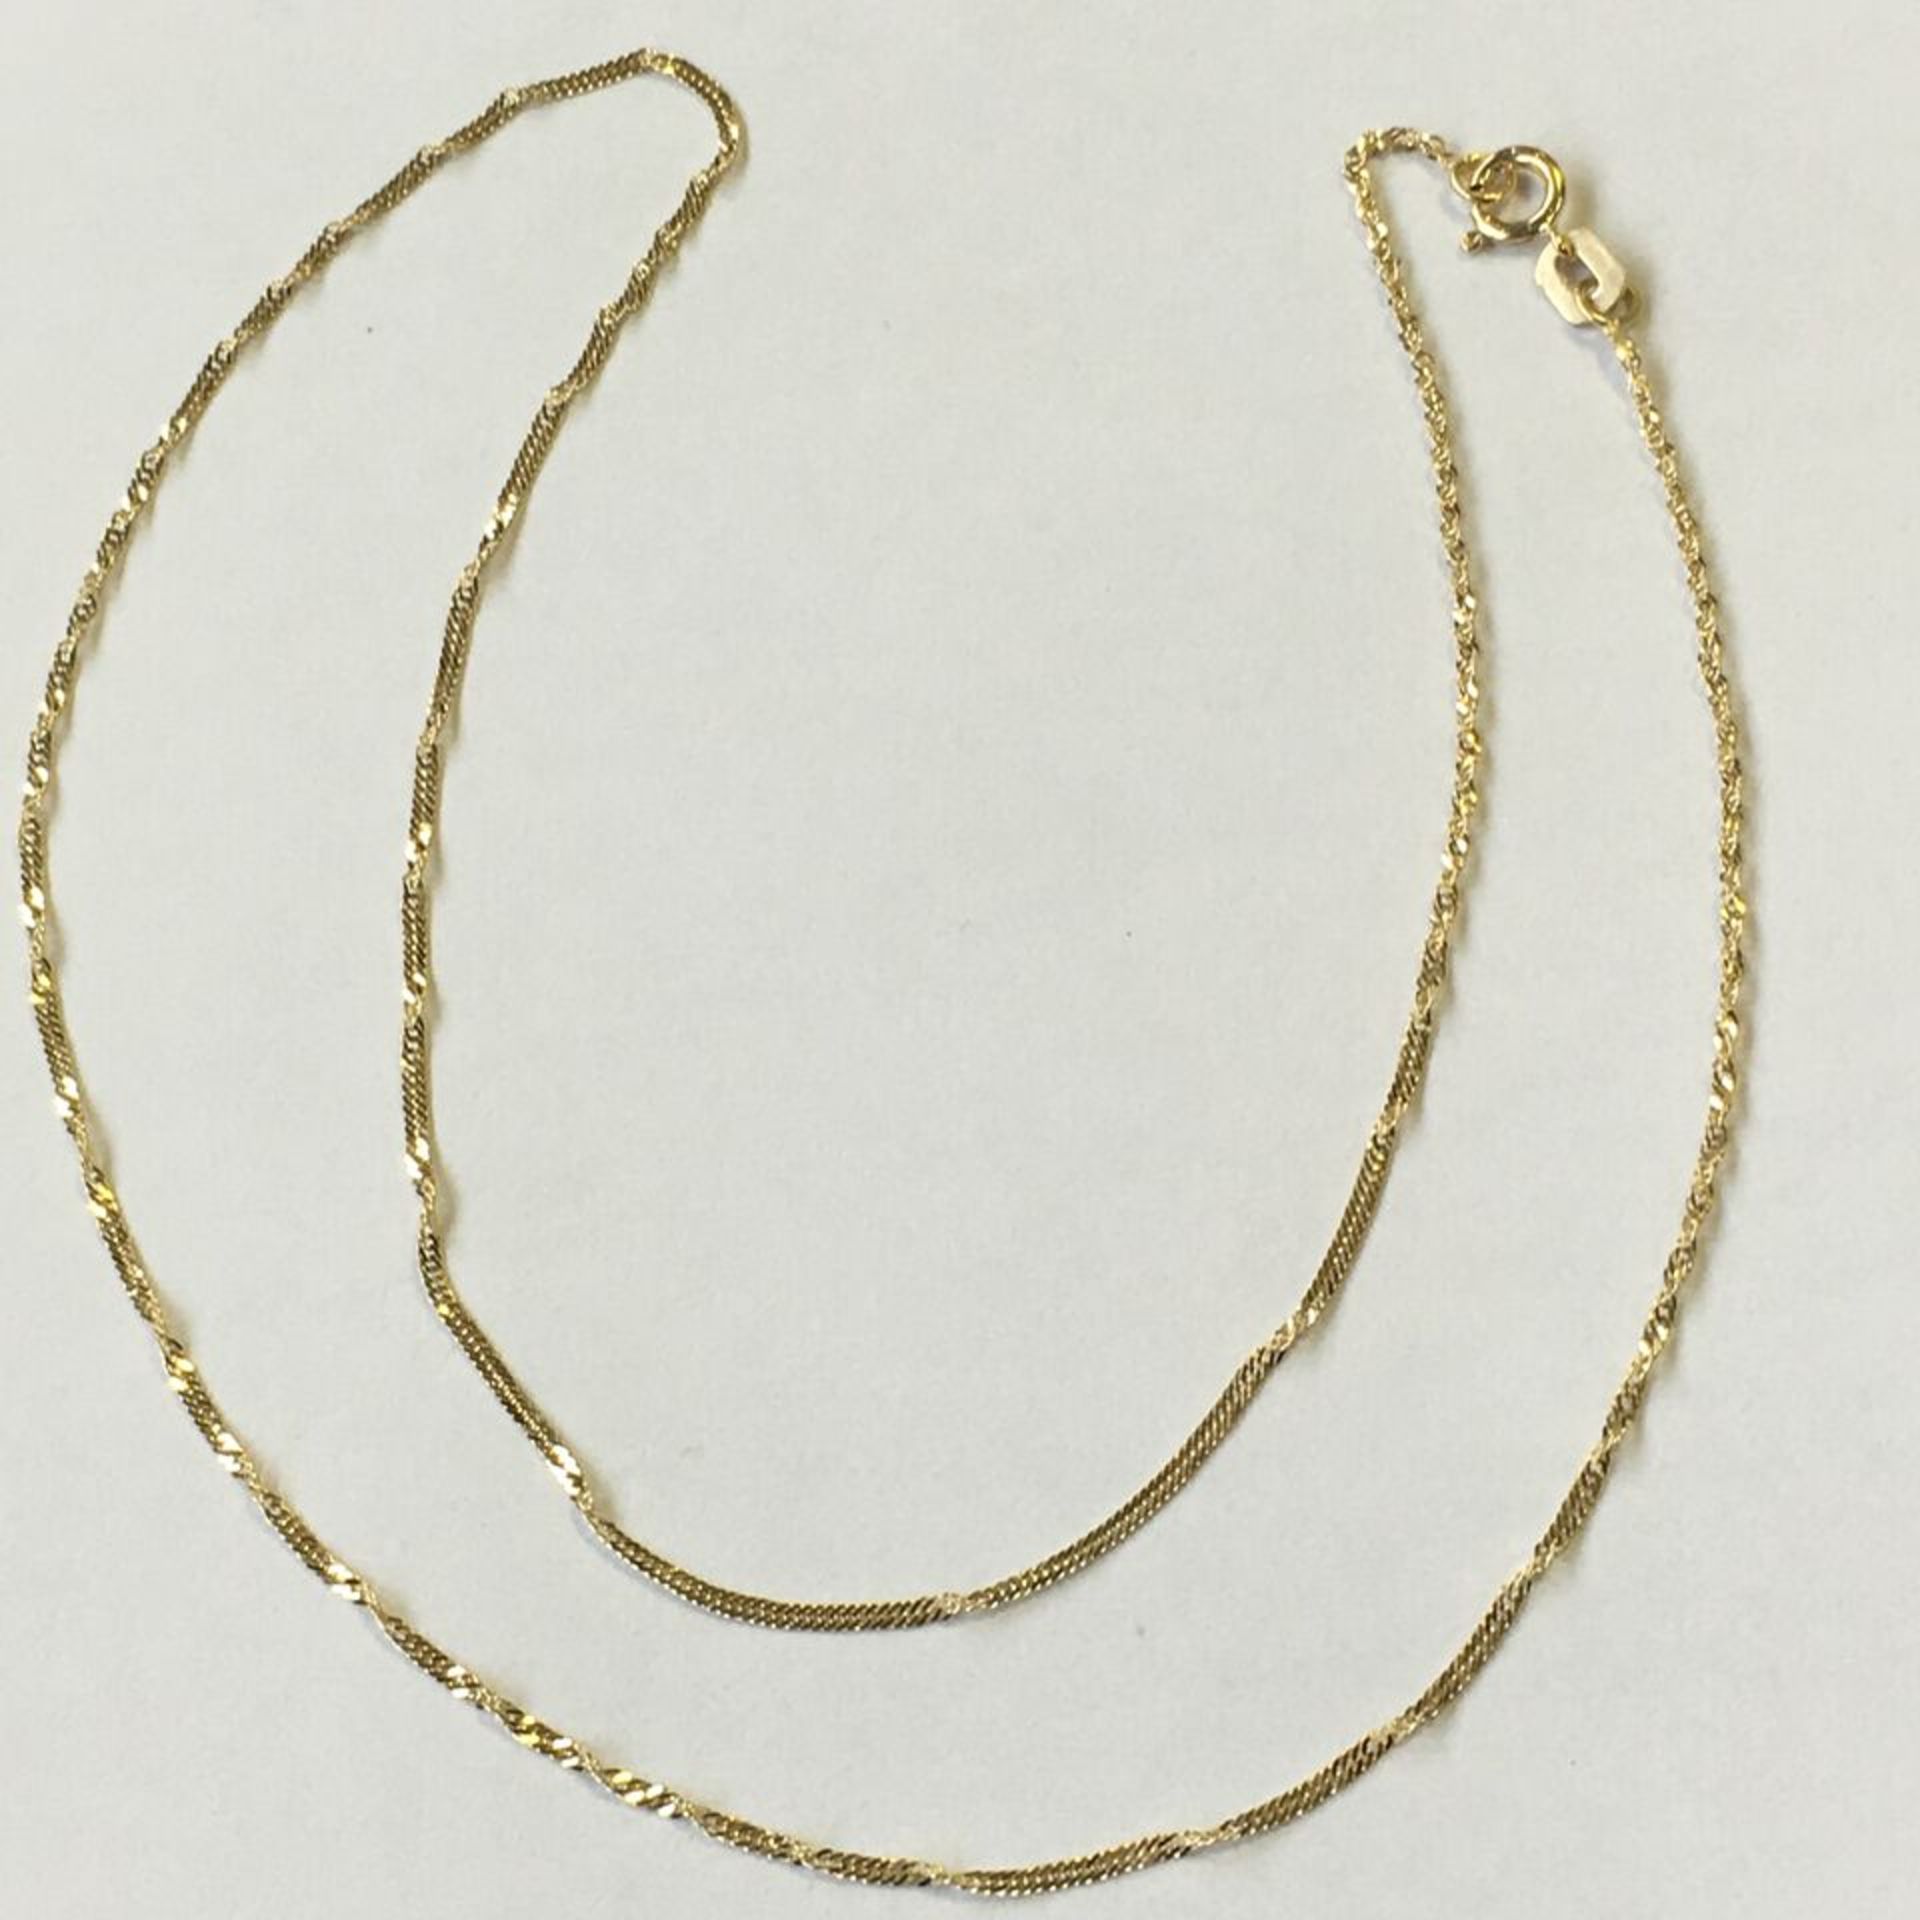 HALLMARKED 9CT GOLD PRINCE OF WALES STYLE CHAIN NECKLACE. 16" . FREE UK DELIVERY. NO VAT.